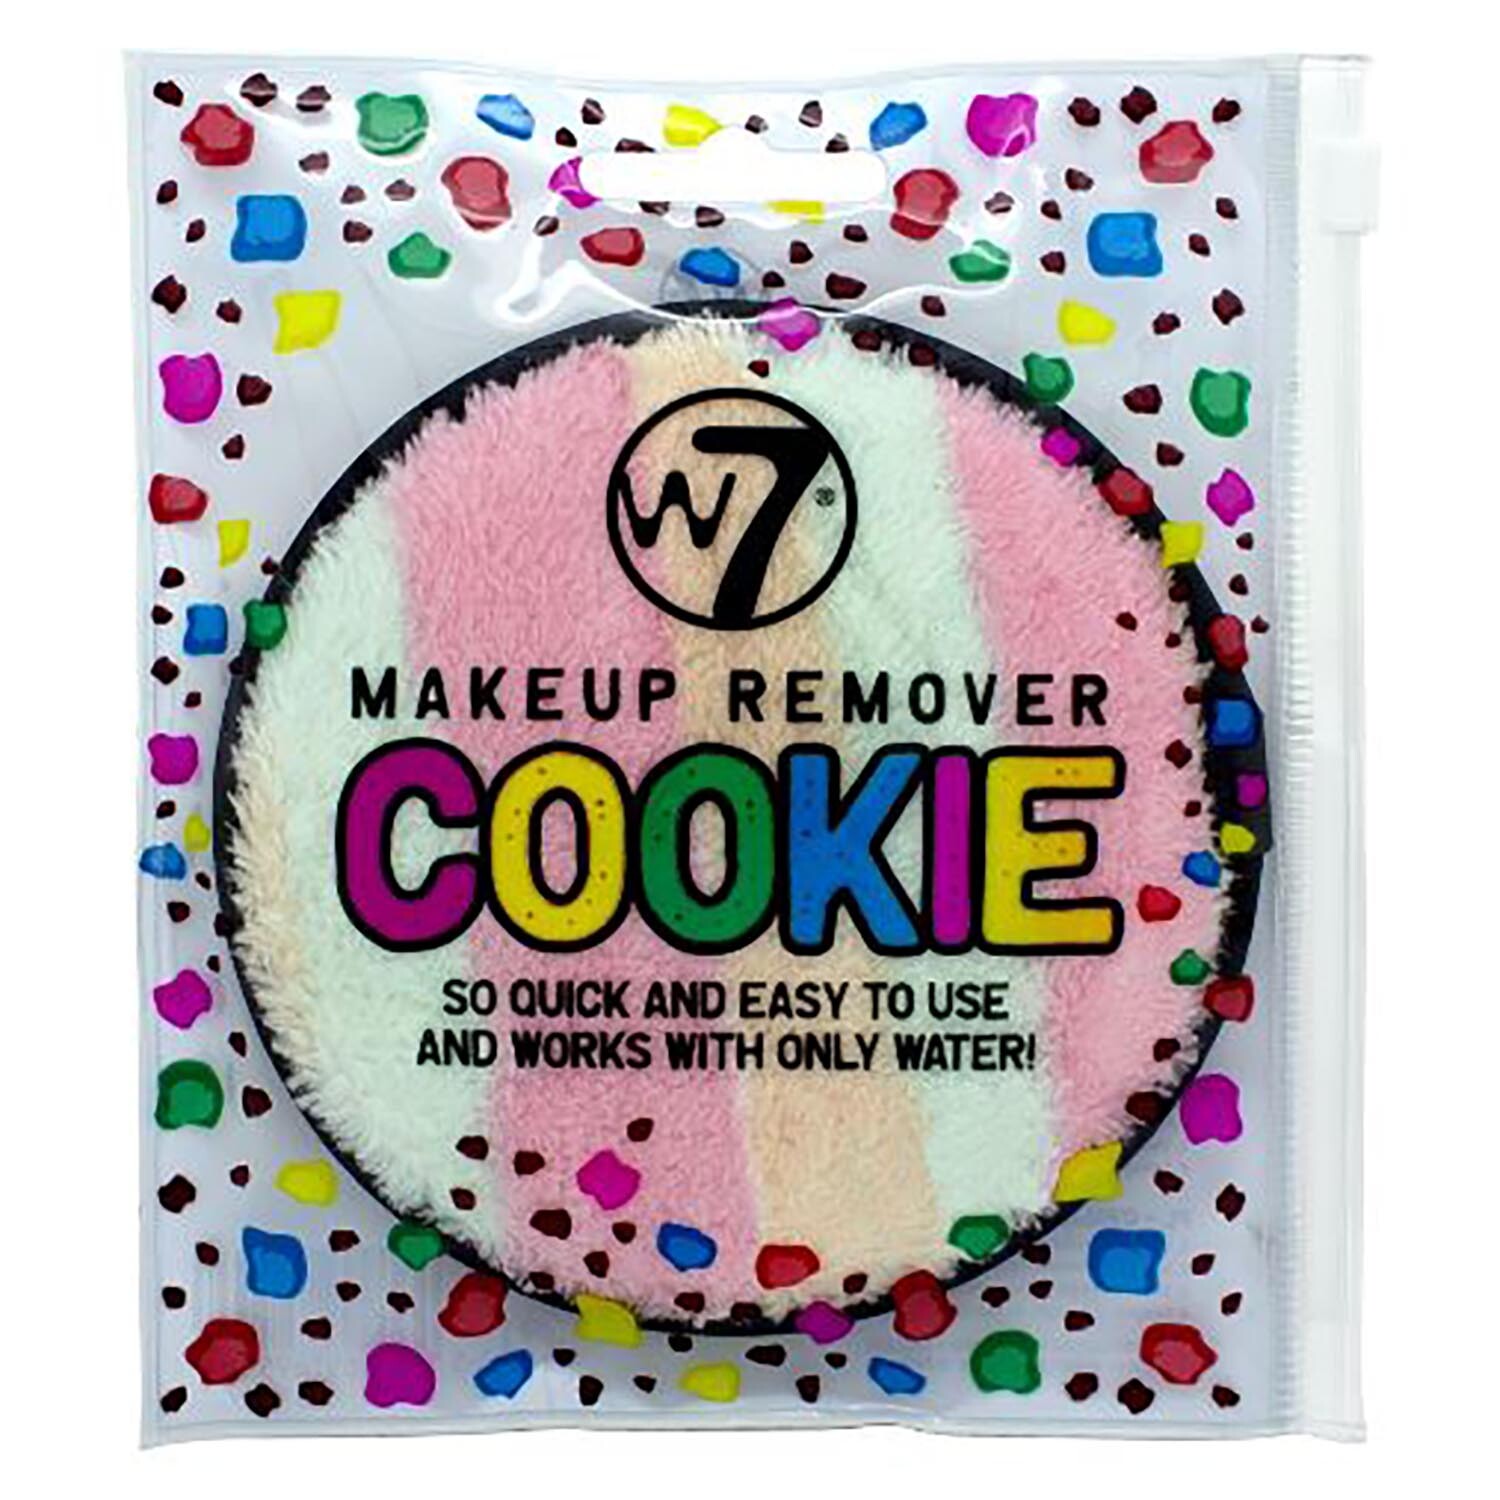 W7 Makeup Remover Cookie Image 1